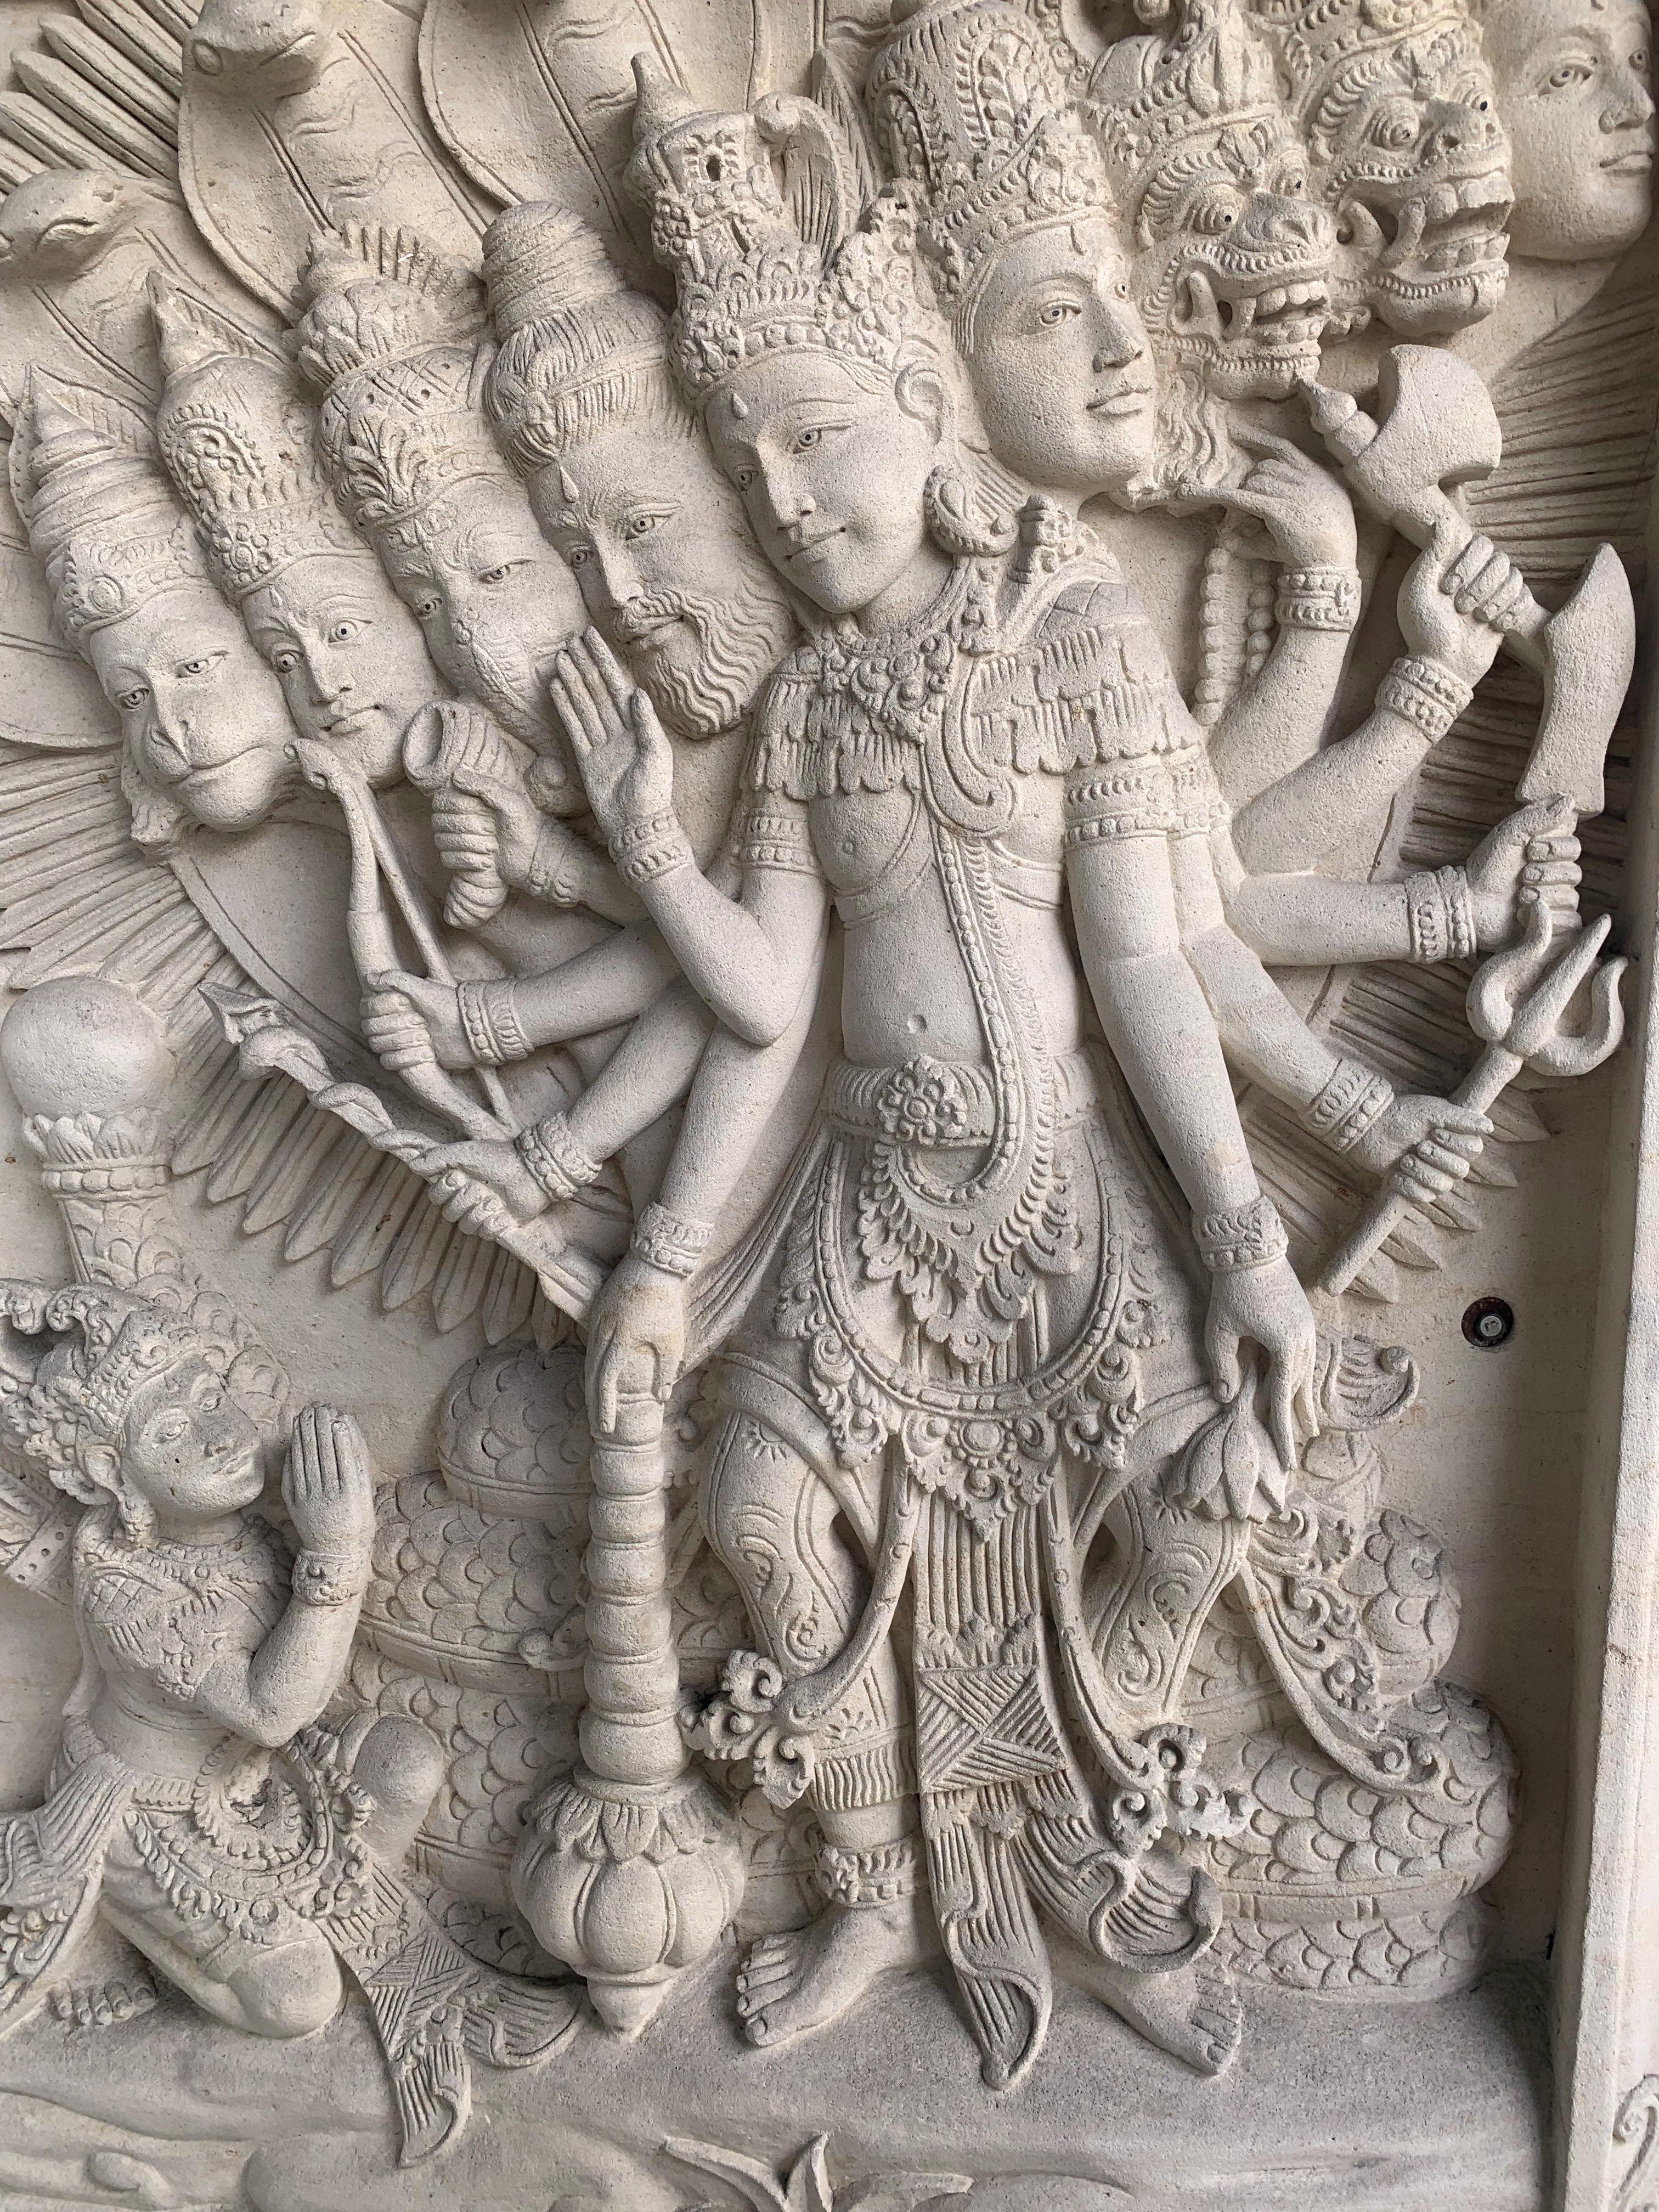 A hand-carved sandstone panel from Bali, Indonesia. This panel was meticulously carved and features 10 Hindu Gods that are draped by 6 cobras in the background. Some of the gods depicted in this carving include Hanuman on the far left, Ganesha;